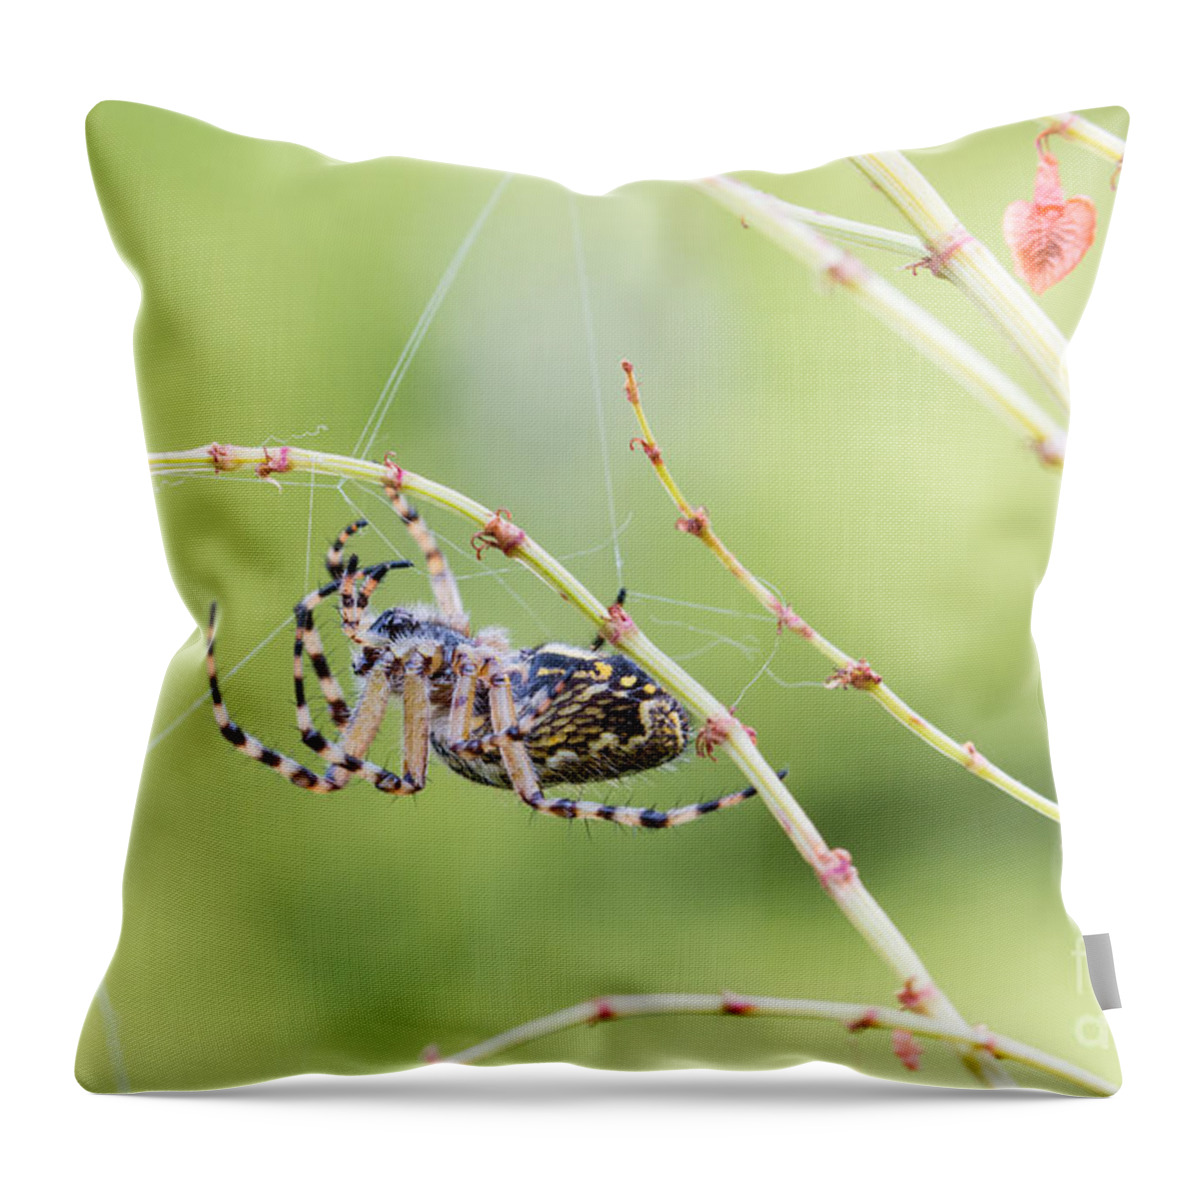 Aculepeira Ceropegia Throw Pillow featuring the photograph Weaving a net by Jivko Nakev